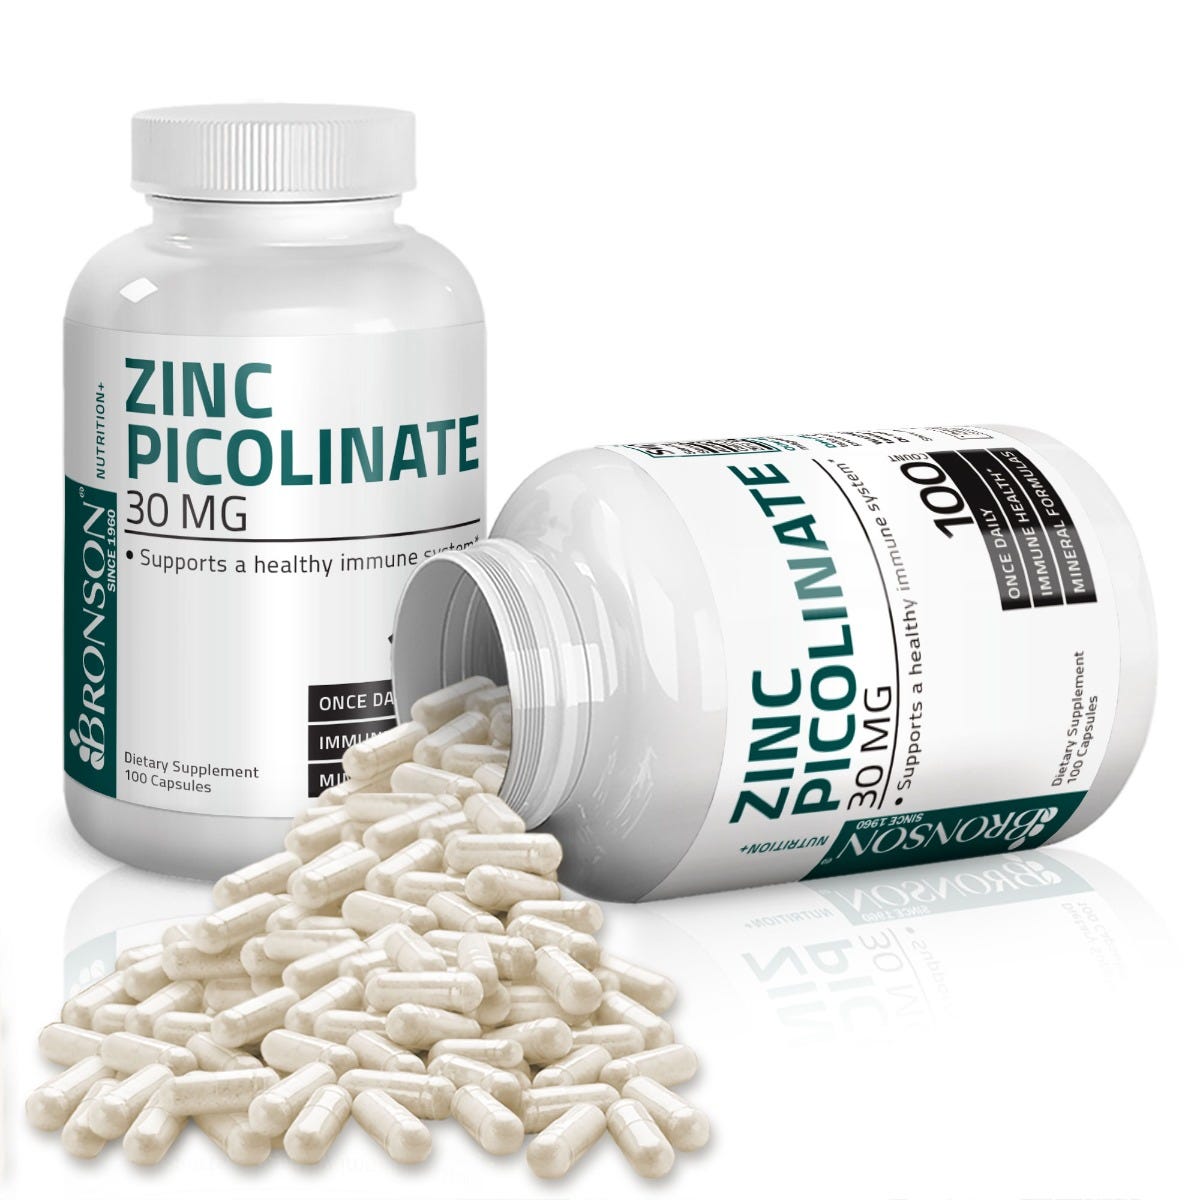 Zinc Picolinate - 30 mg - 100 Capsules view 3 of 6